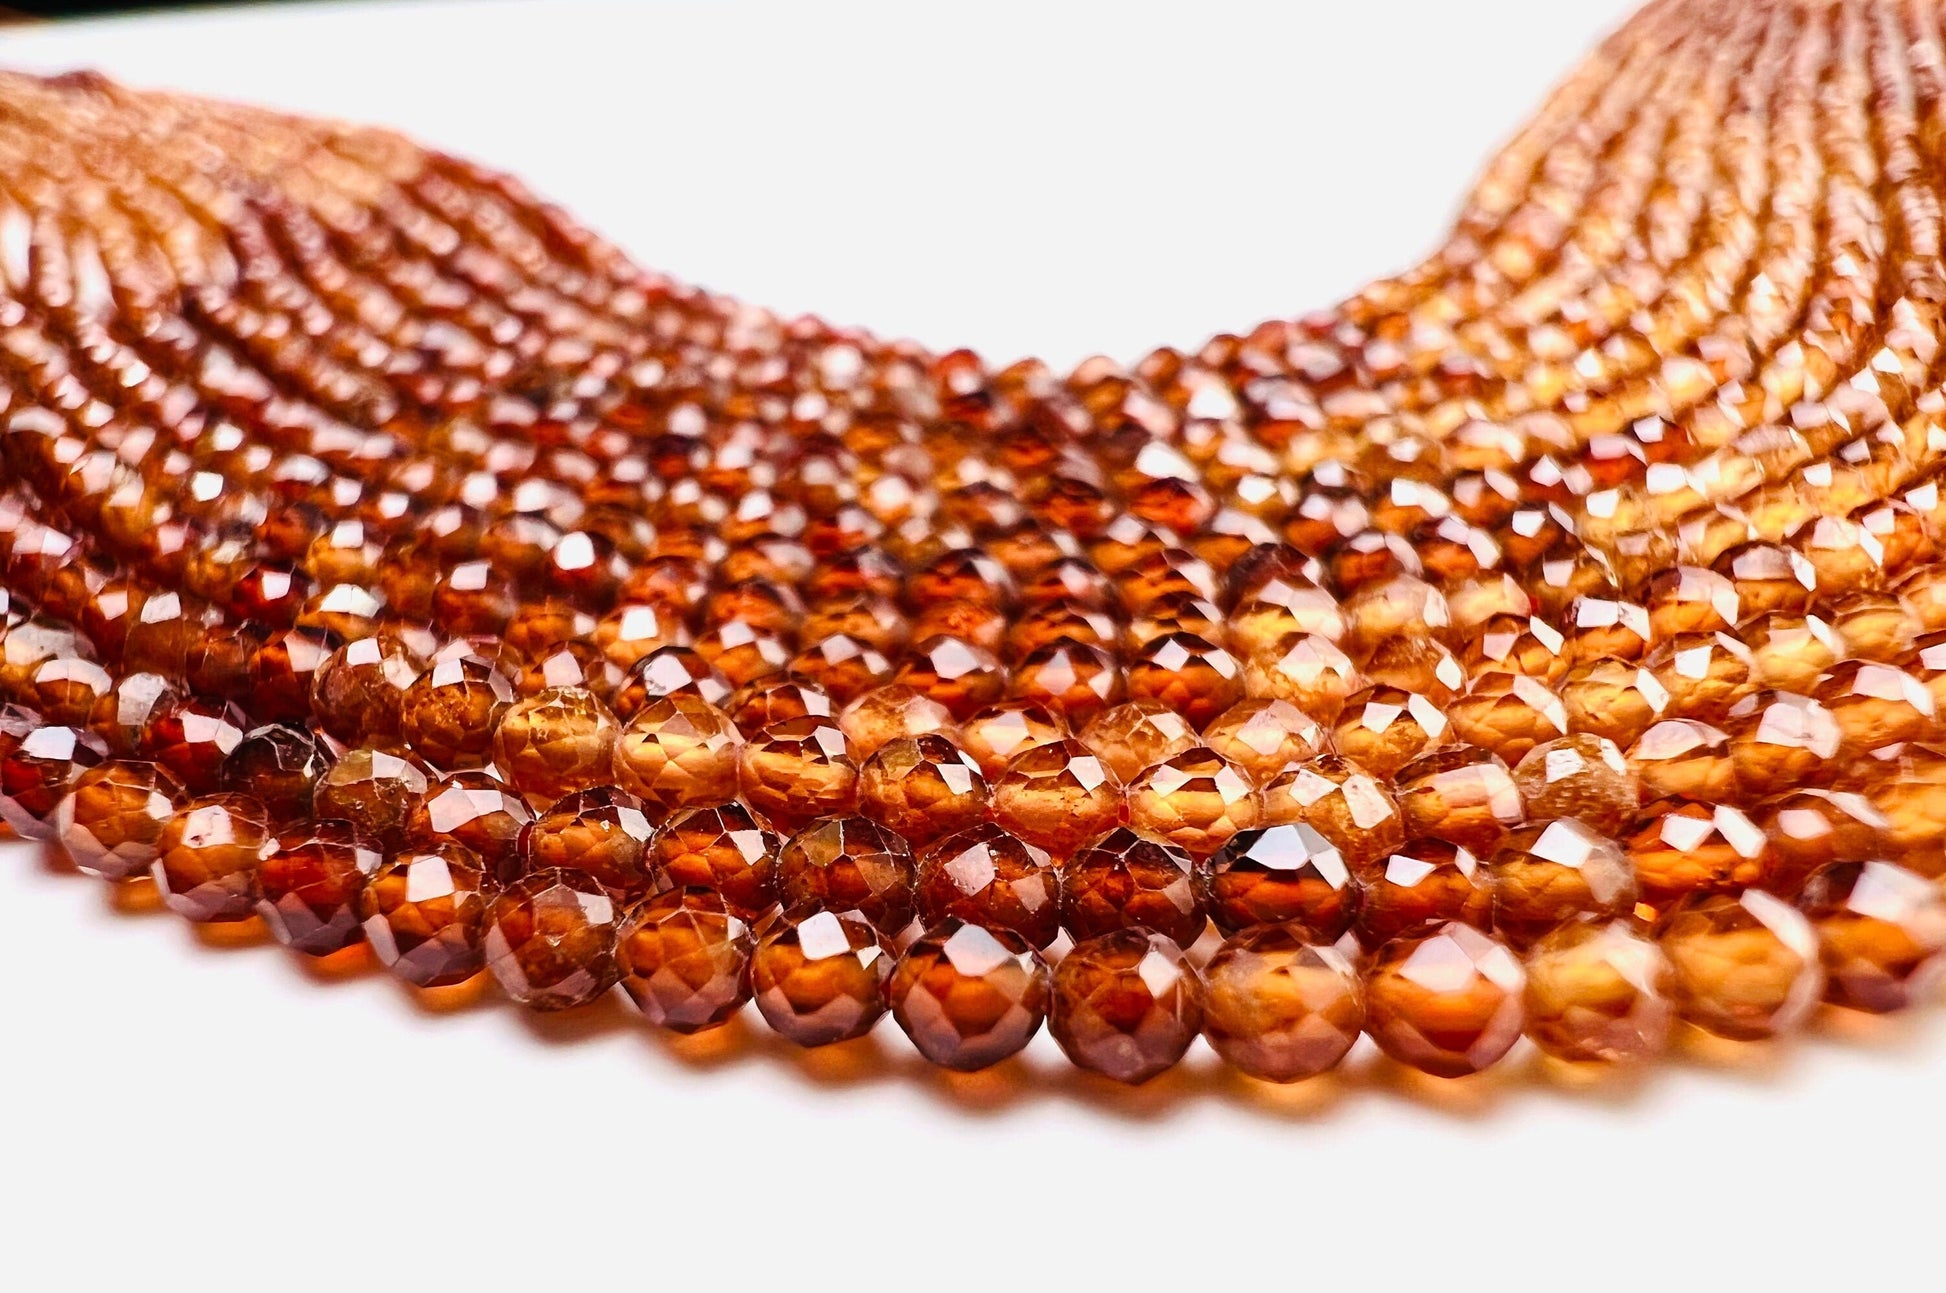 Brown Zirconia Micro Faceted 2mm Round shaded AAA quality Gemstone Jewelry Making Beads 15.5” Strand